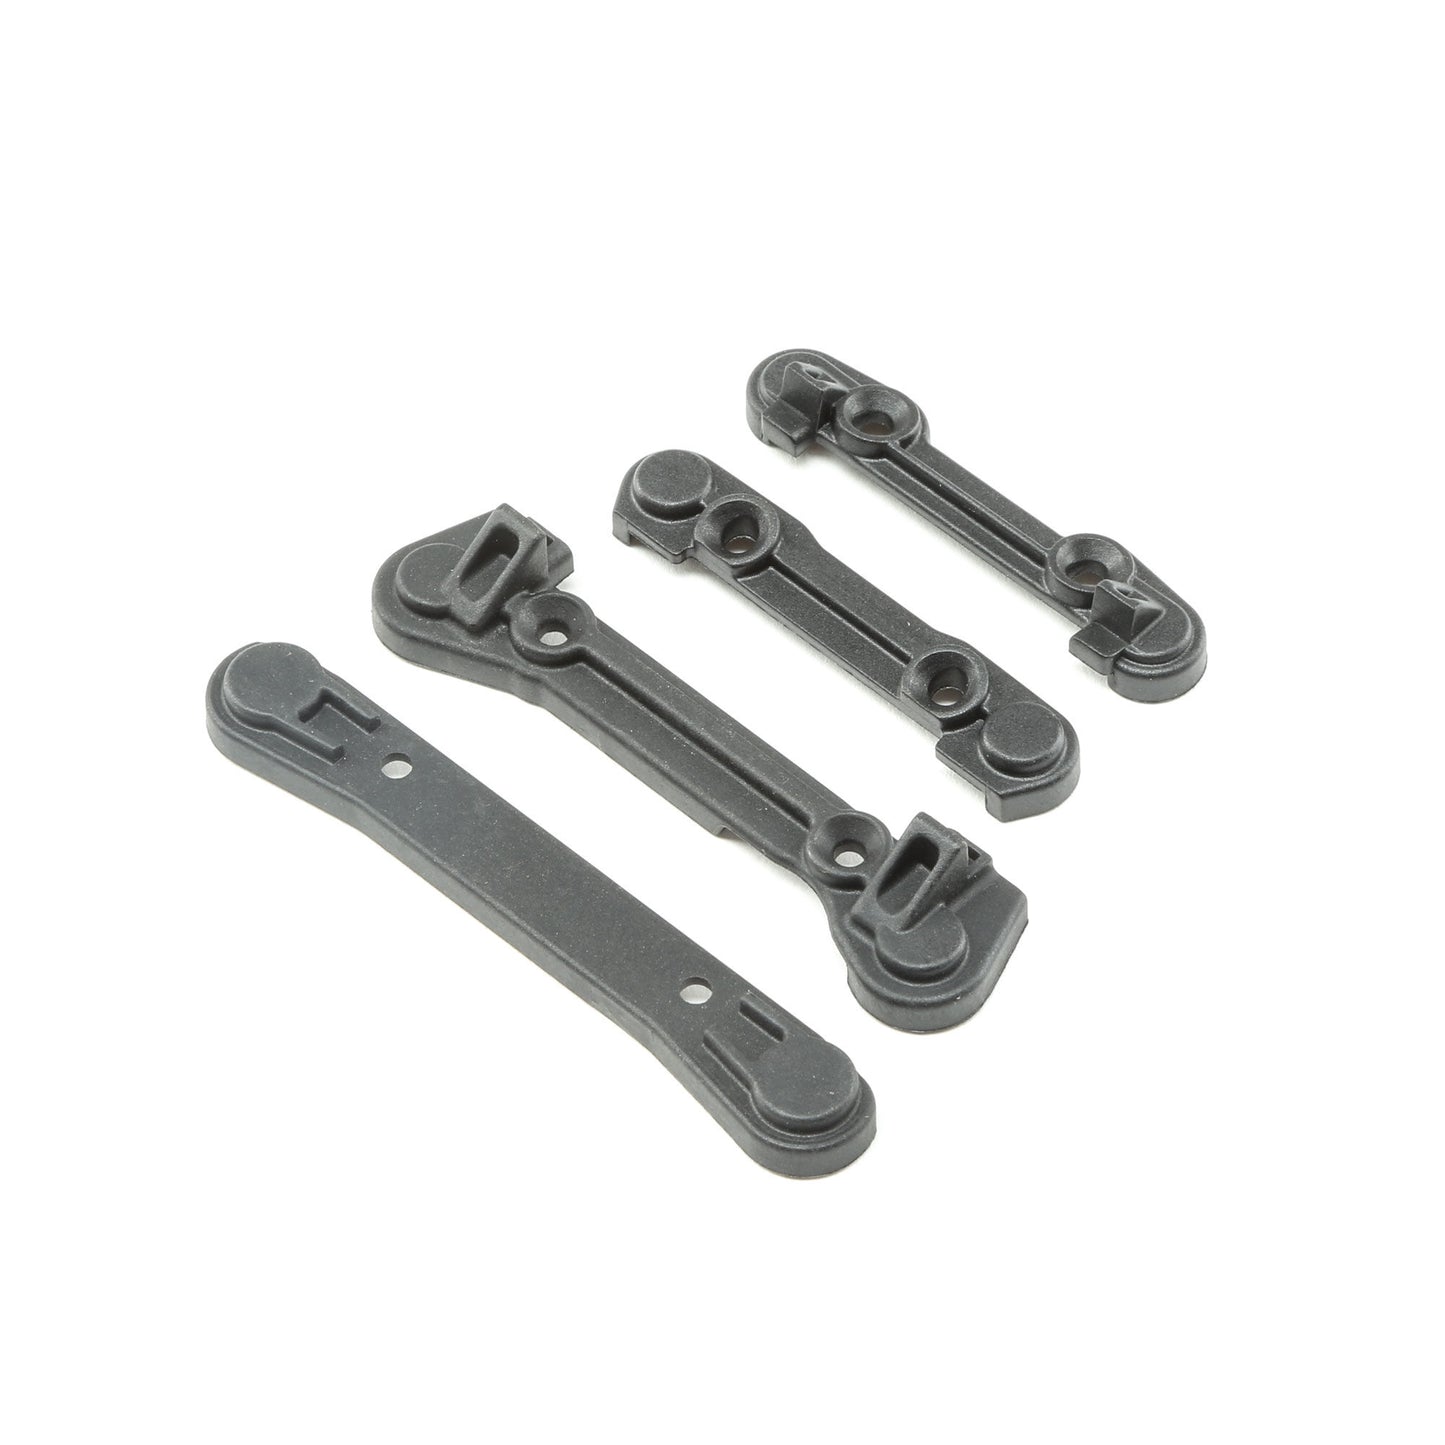 Front/Rear Pin Mount Cover Set